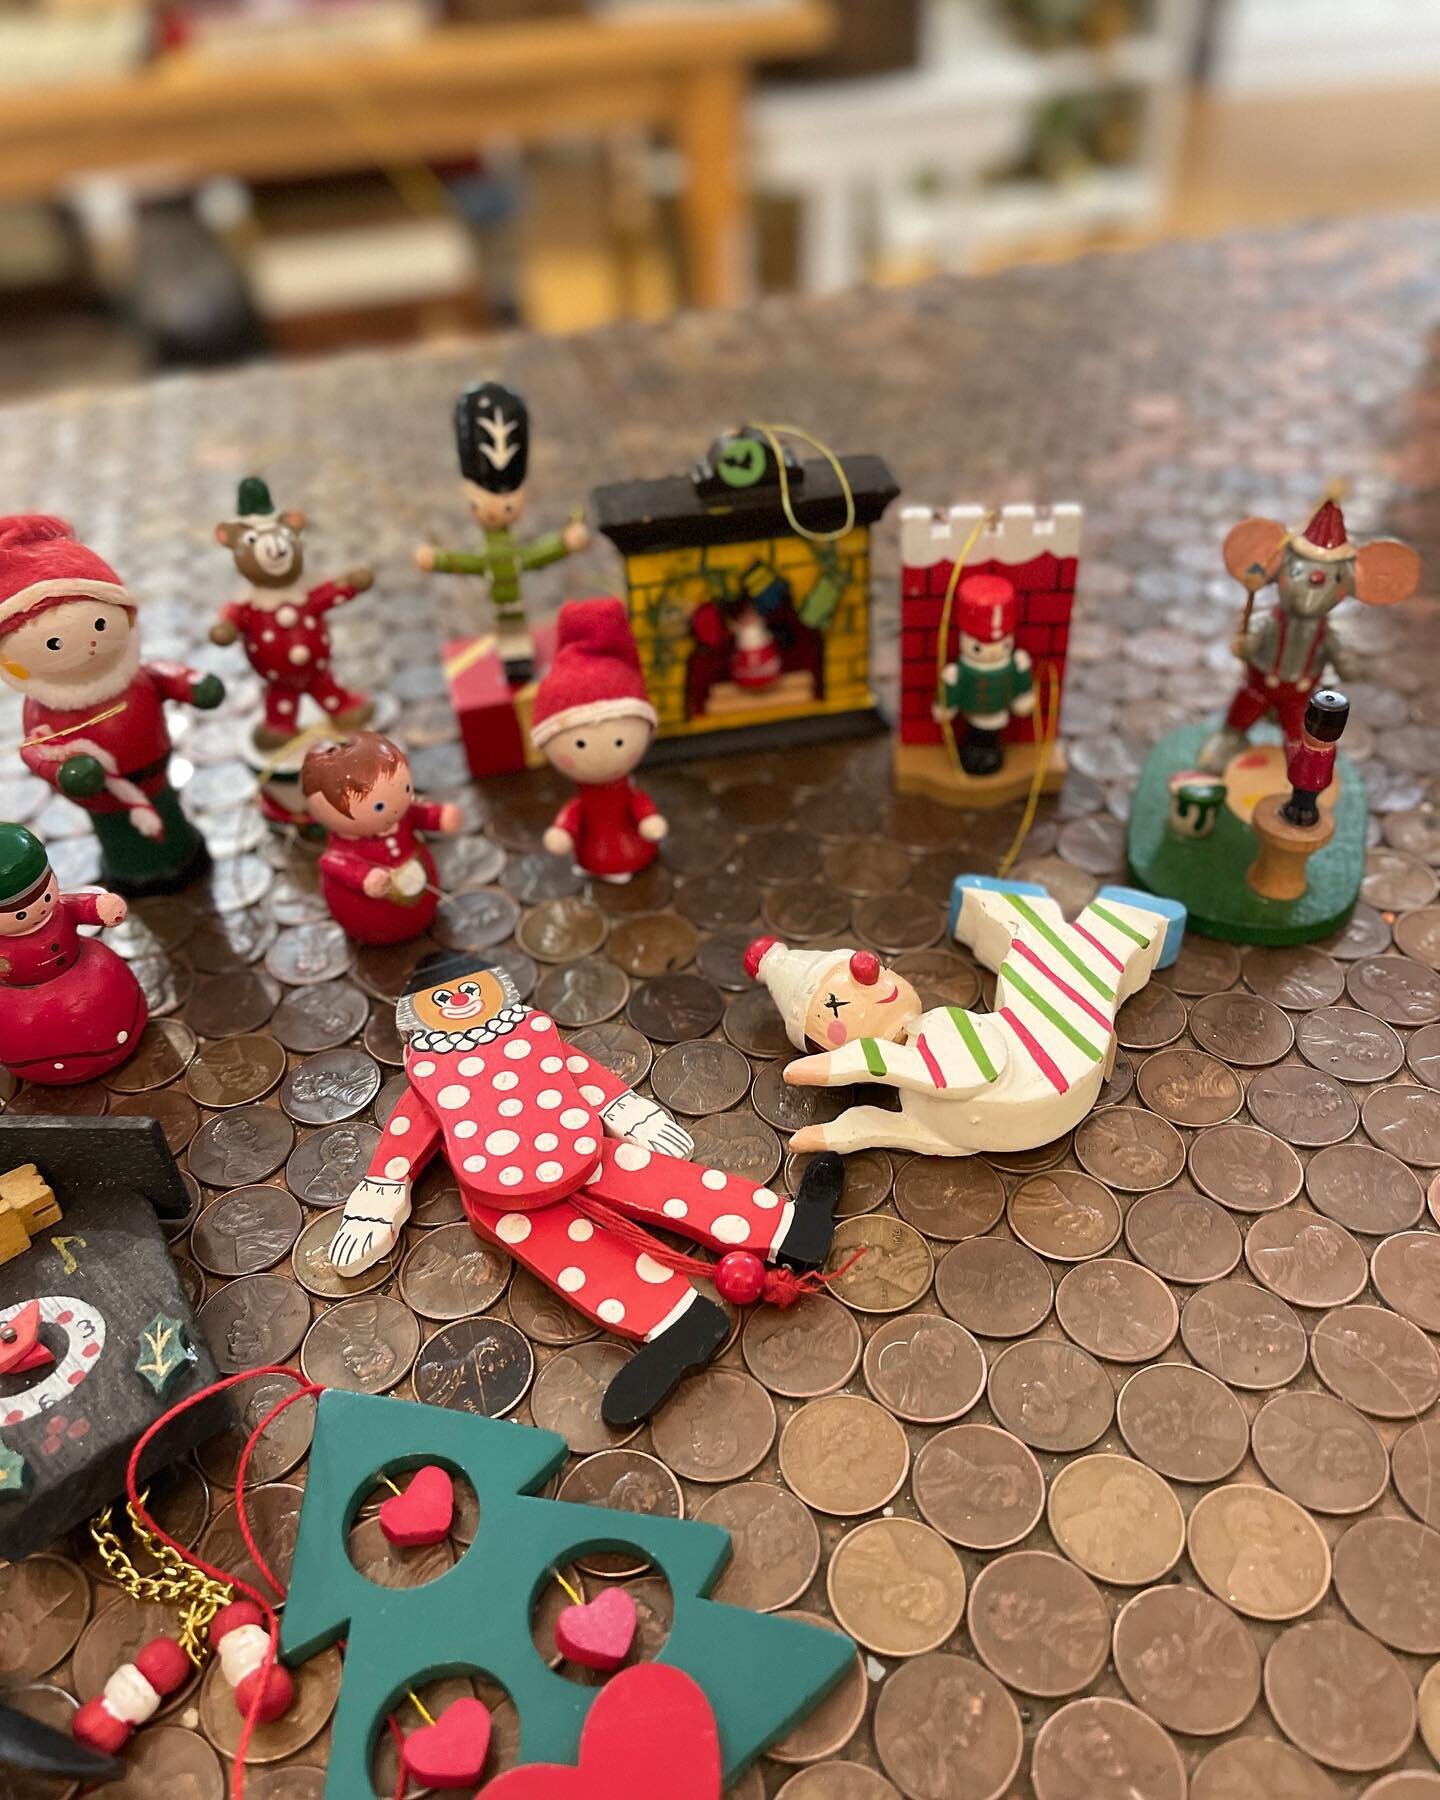 Everyone loves their own special ornaments to hang on the tree. Come pick the perfect one for your loved one and see what else we have. Unique gift ideas are aplenty at The Hunt!